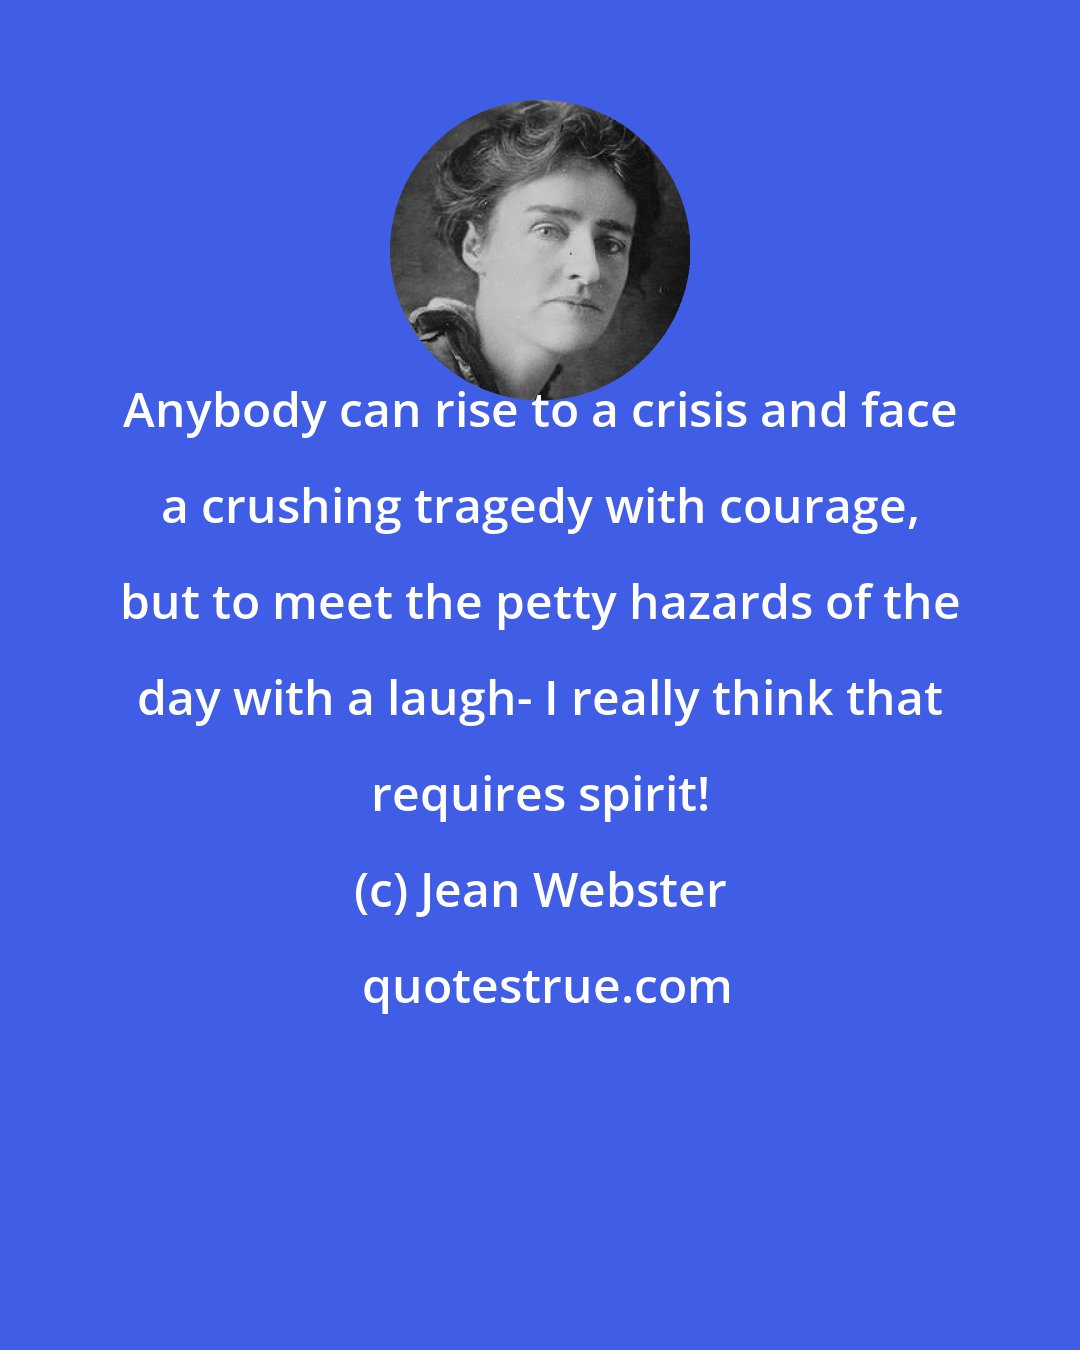 Jean Webster: Anybody can rise to a crisis and face a crushing tragedy with courage, but to meet the petty hazards of the day with a laugh- I really think that requires spirit!